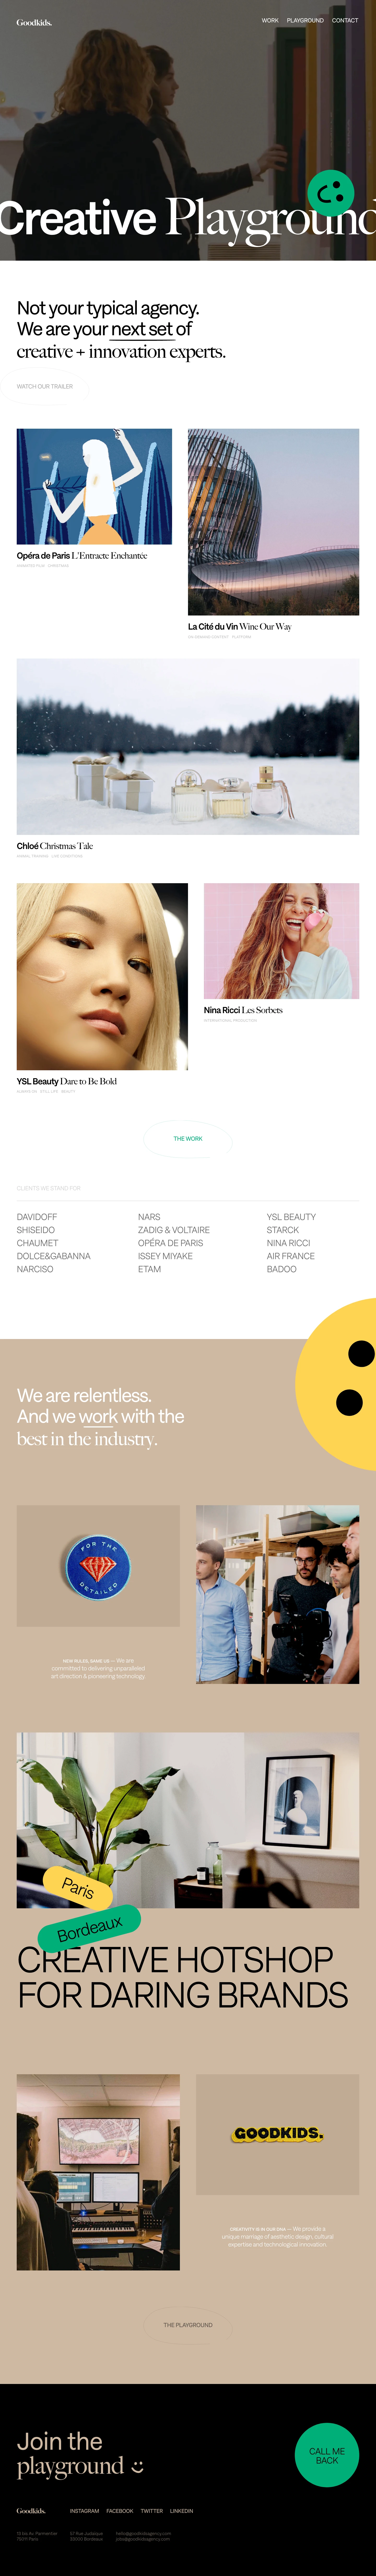 Goodkids Landing Page Example: Not your typical agency. We are your next set of creative & innovation experts.